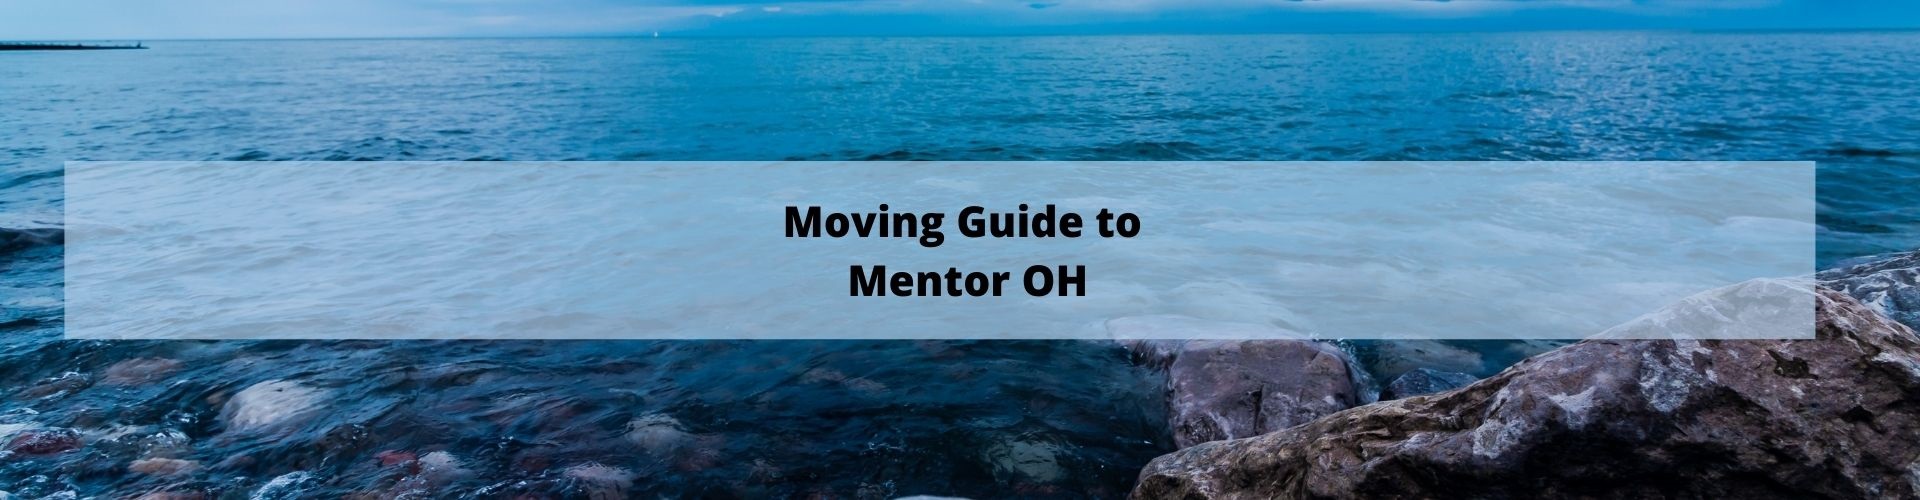 Mover's Guide Mentor OH